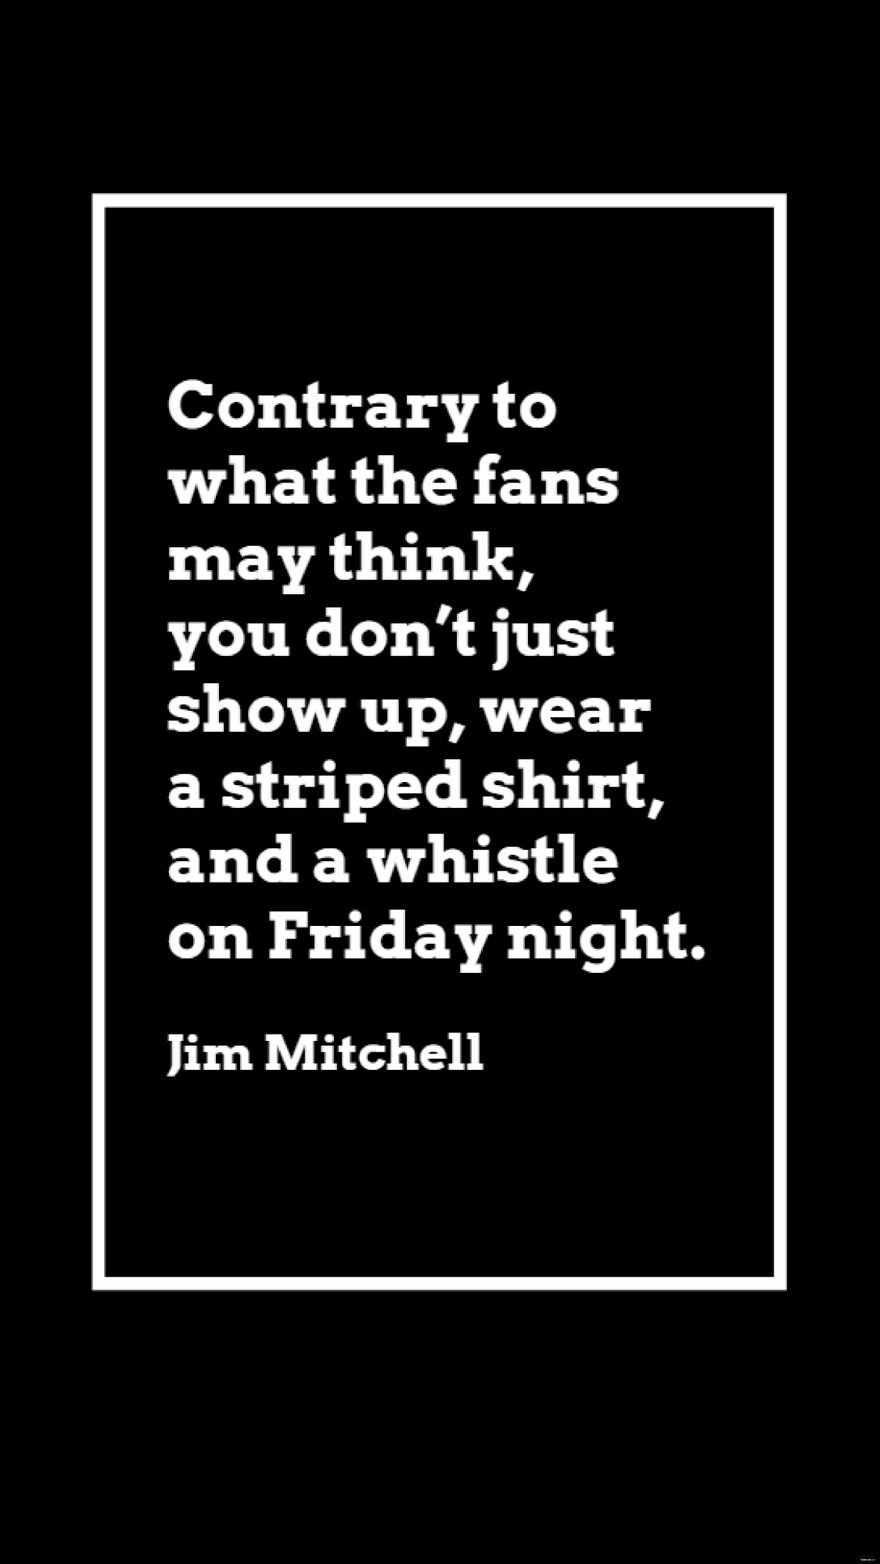 Jim Mitchell - Contrary to what the fans may think, you don’t just show up, wear a striped shirt, and a whistle on Friday night. 